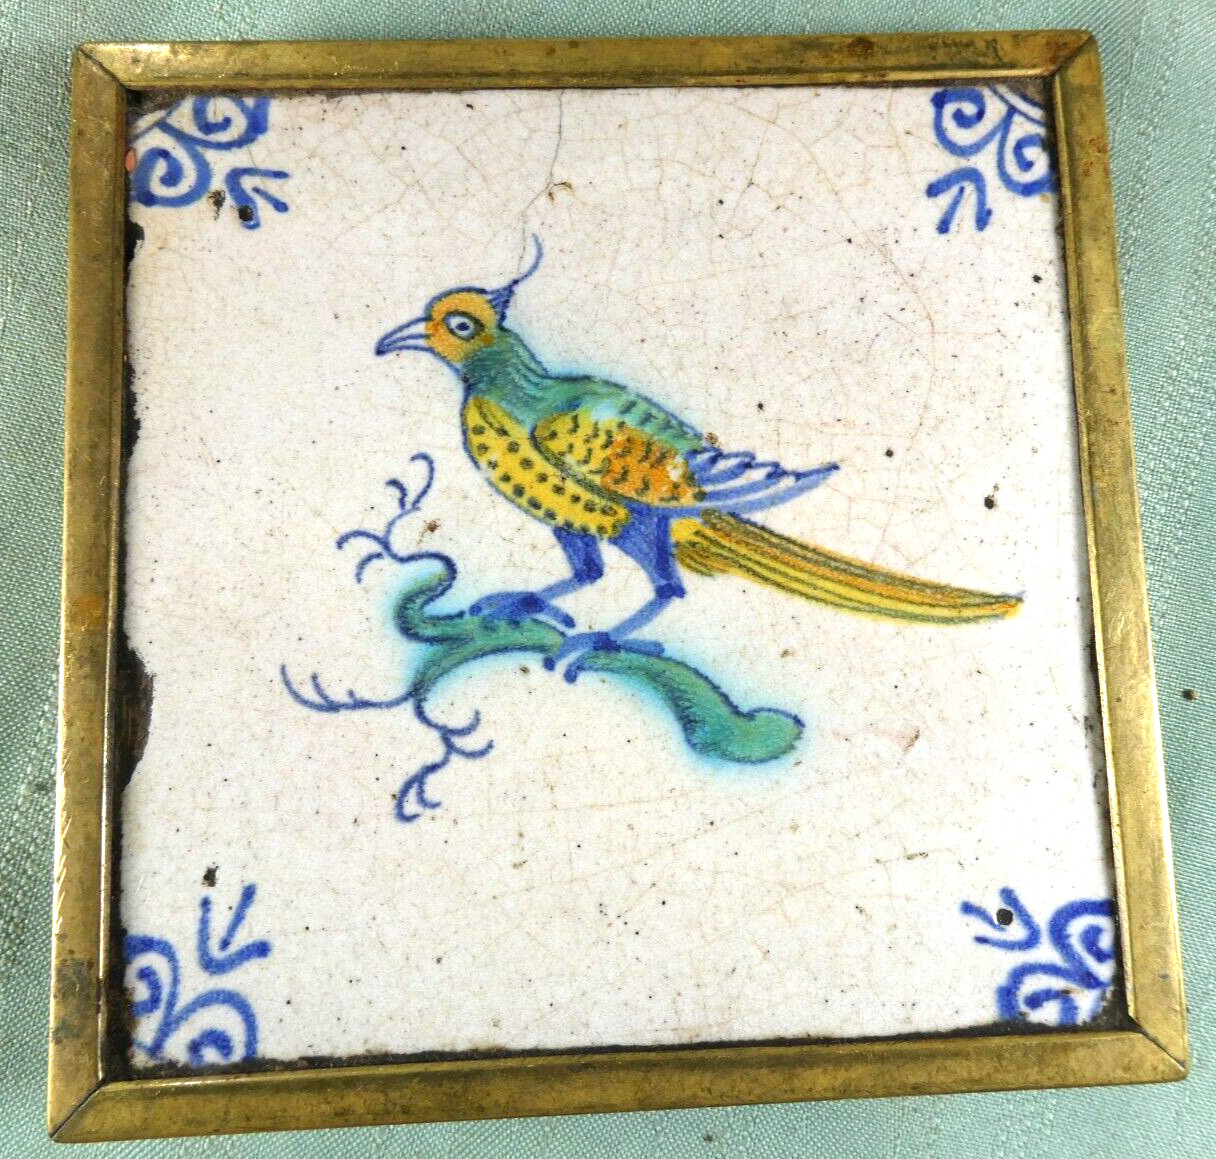 Antique Dutch Delft Tile with Bird Drawing 1600-1650 Framed in Brass Rare